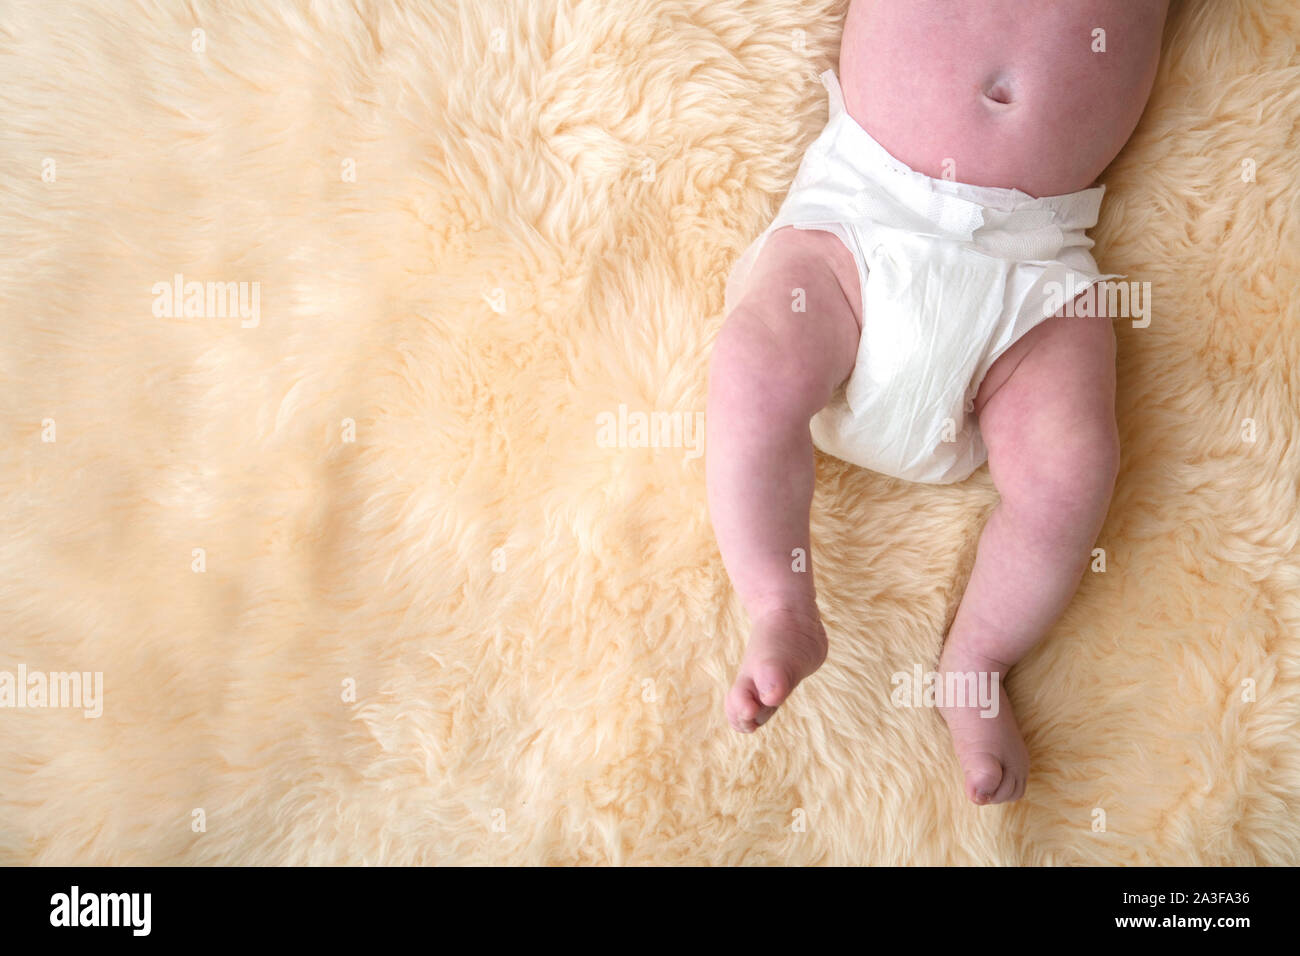 Newborn Baby Legs With White Nappy Diaper On A Fur Background Stock